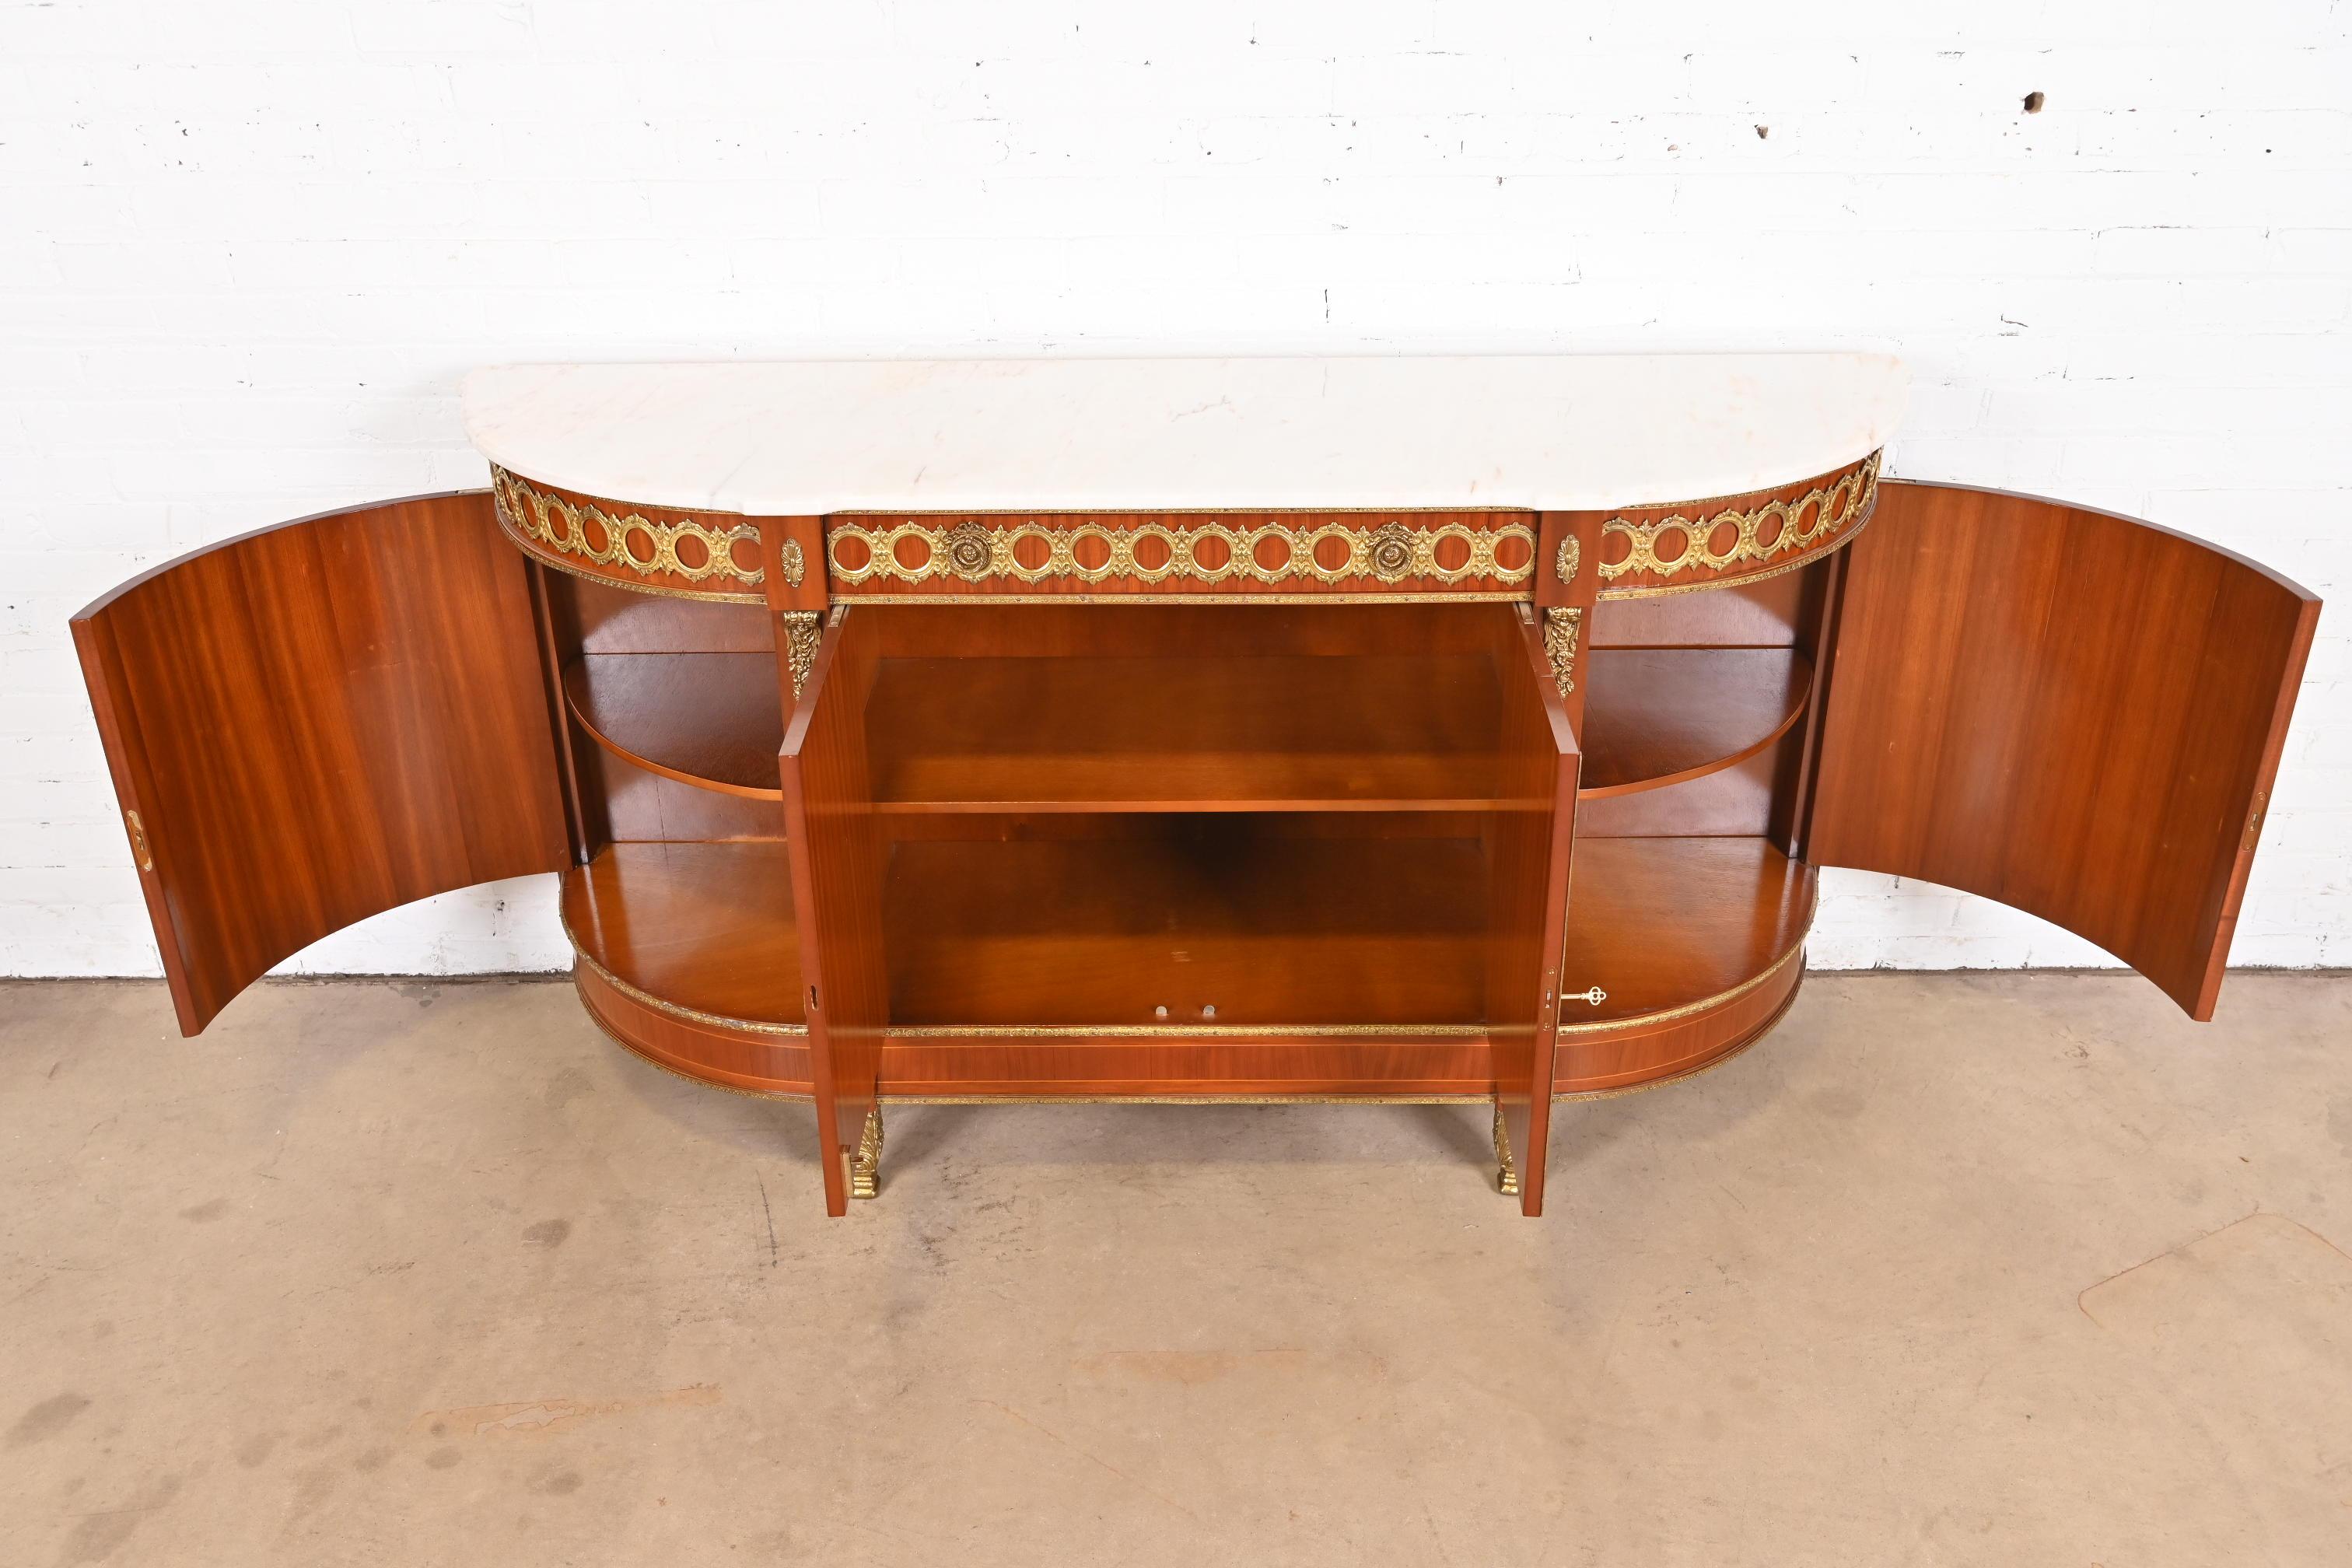 French Louis XVI Kingwood Inlaid Marquetry Marble Top Bronze Mounted Sideboard For Sale 10